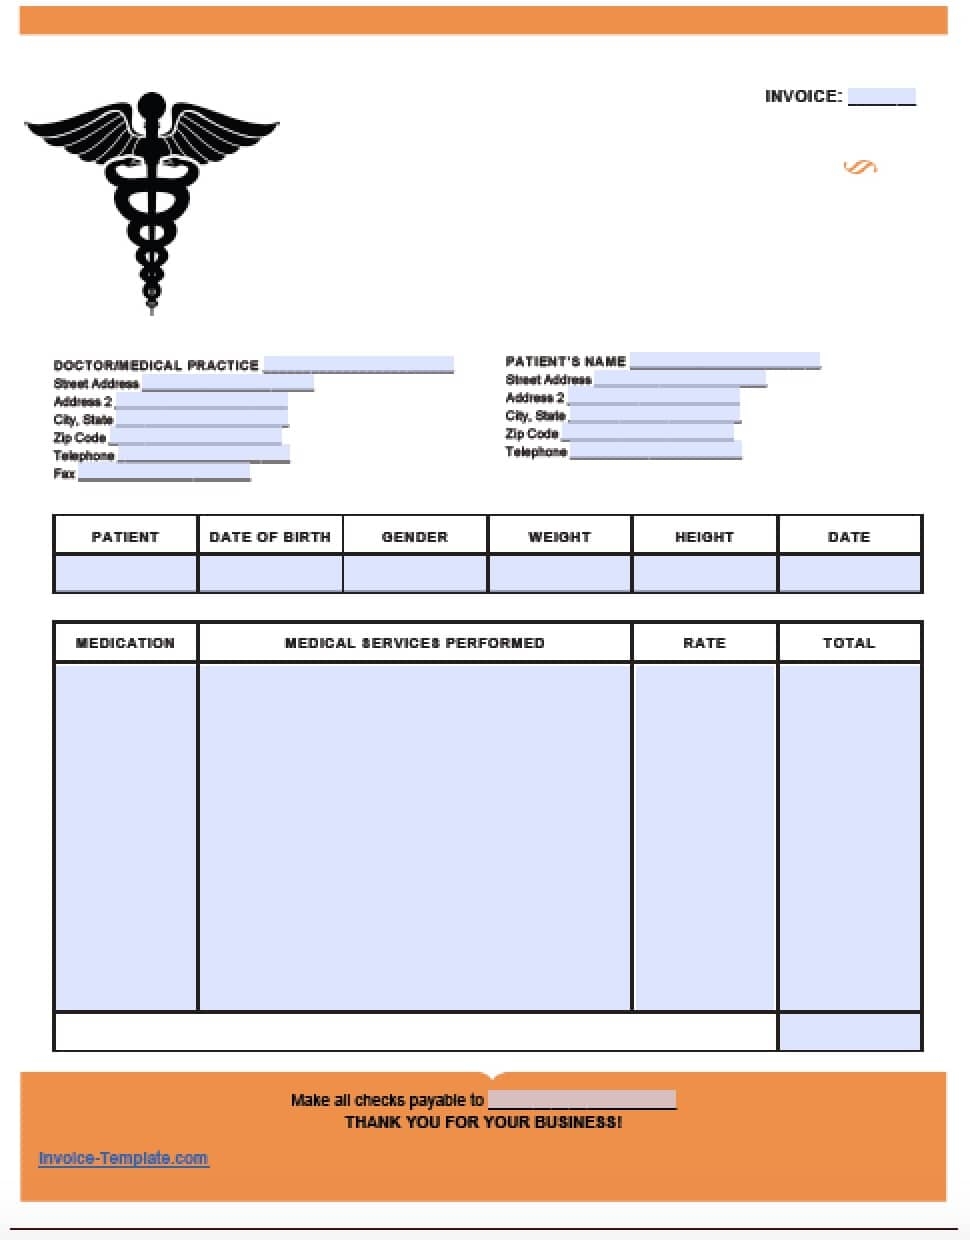 medical invoice template free medical invoice template excel pdf word doc 970 X 1240